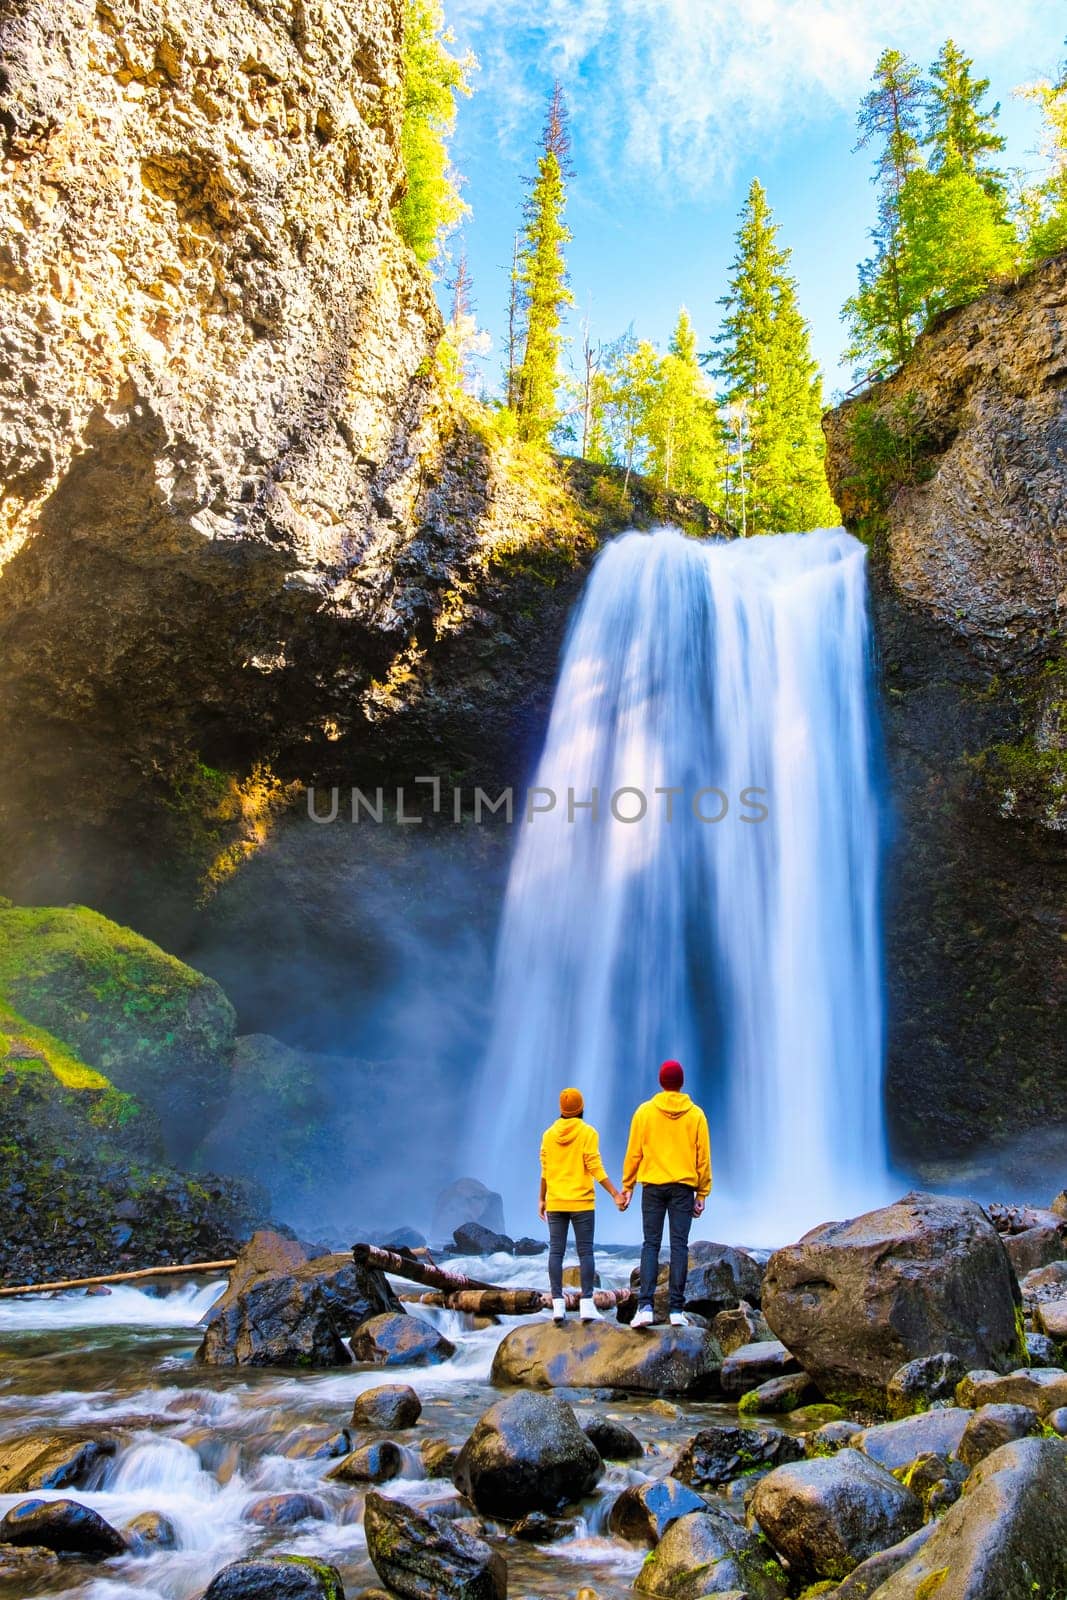 Moul Falls, the most famous waterfall in Wells Gray Provincial Park in British Columbia, Canada by fokkebok